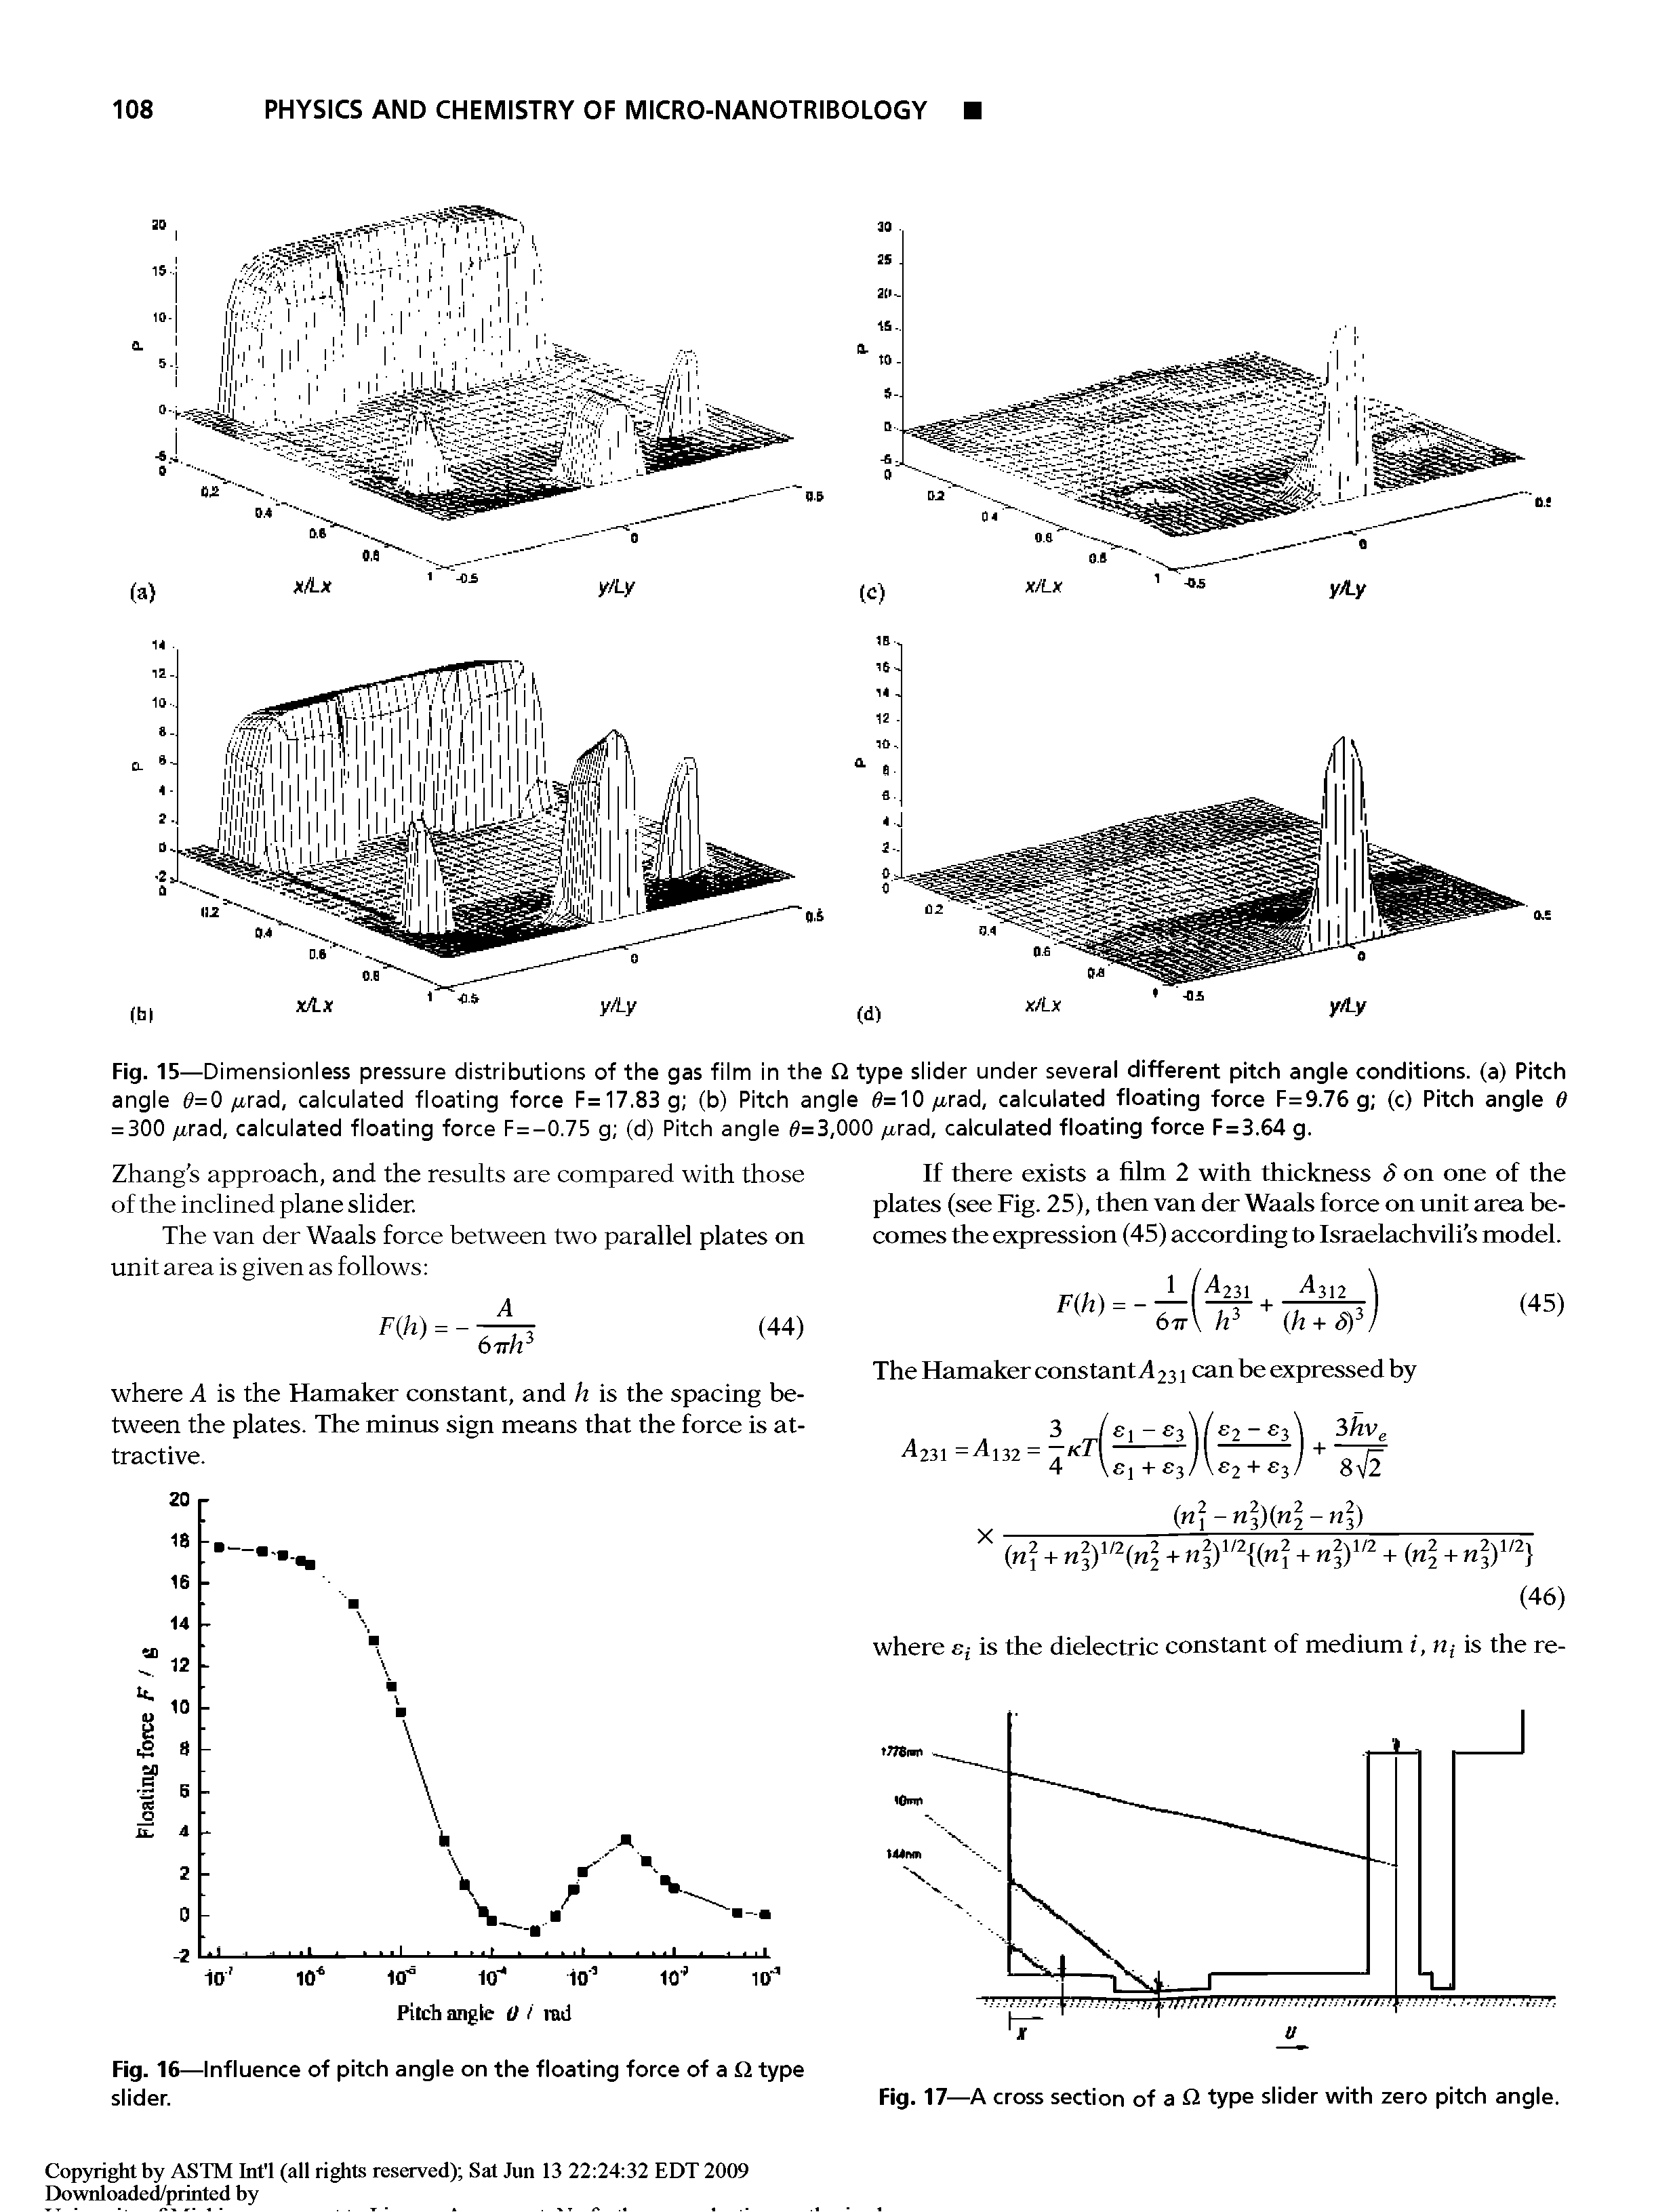 Fig. 15—Dimensionless pressure distributions of the gas film in the Q type slider under several different pitch angle conditions, (a) Pitch angle 0=0 /jirad, calculated floating force F=17.83g (b) Pitch angle 0=1O iirad, calculated floating force F=9.76g (c) Pitch angle 6 = 300 yurad, calculated floating force F = -0.75 g (d) Pitch angle 0=3,000 u,rad, calculated floating force F = 3.64 g.